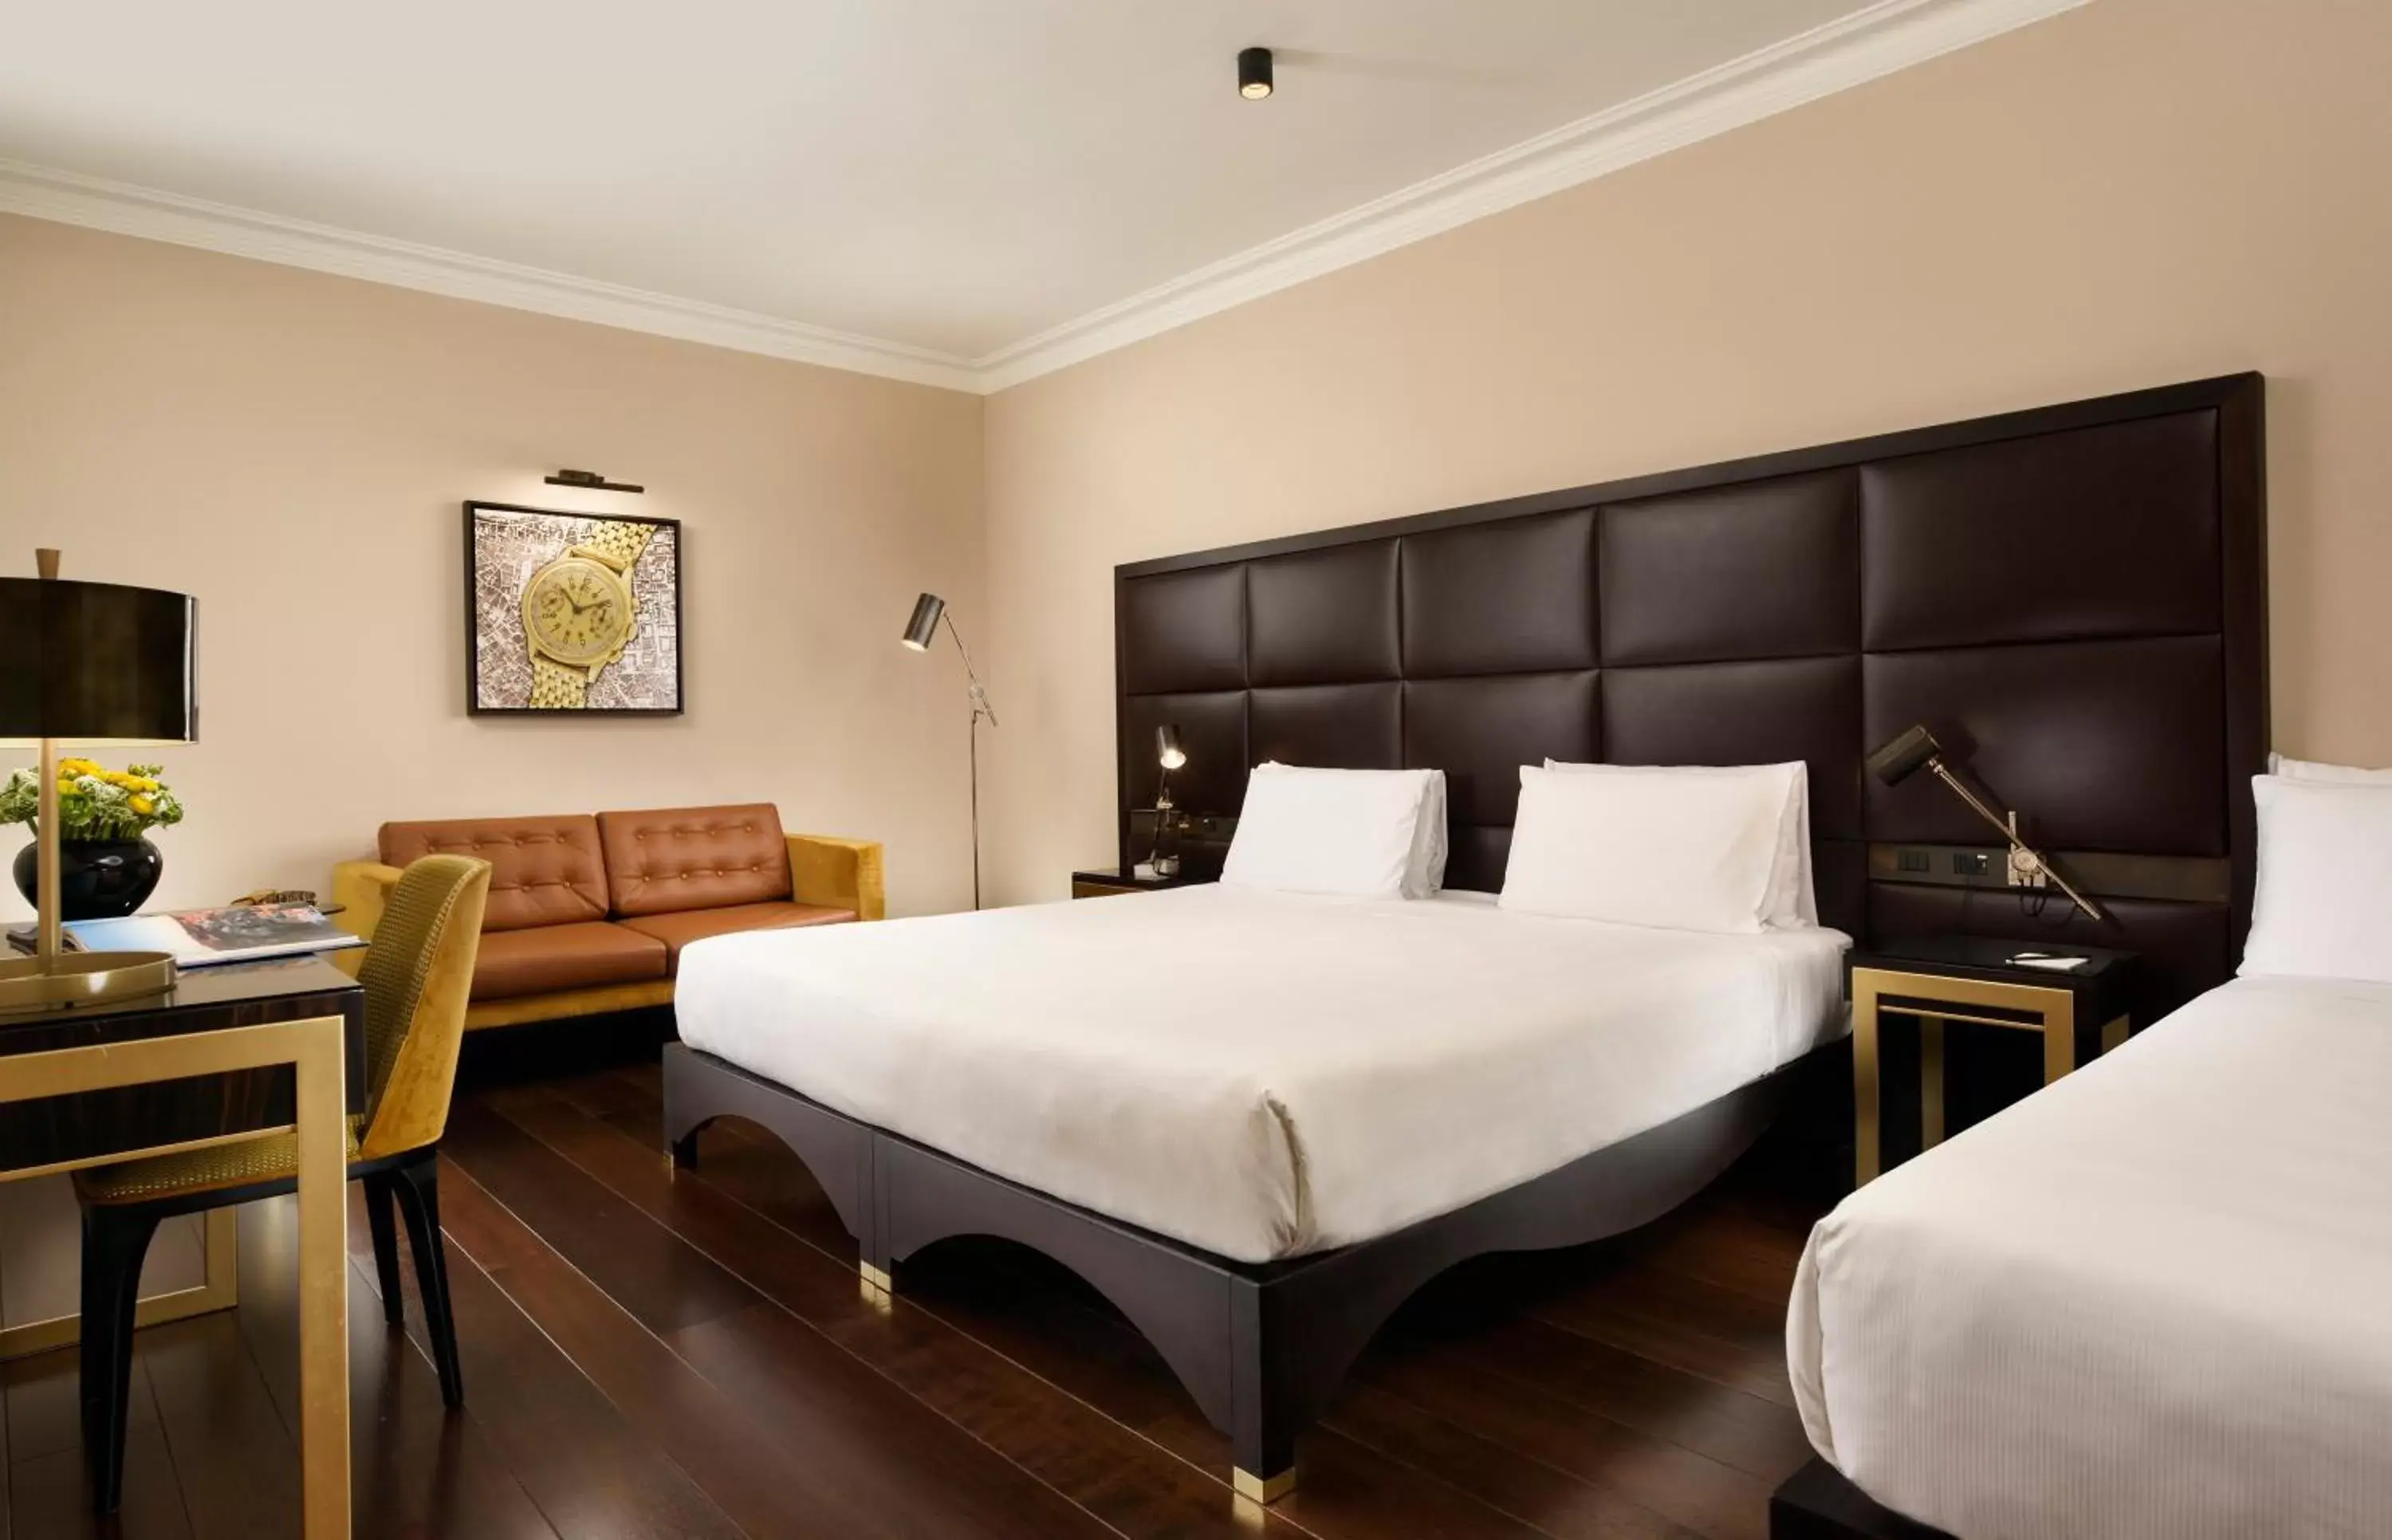 Bed in Hotel L'Orologio Roma - WTB Hotels